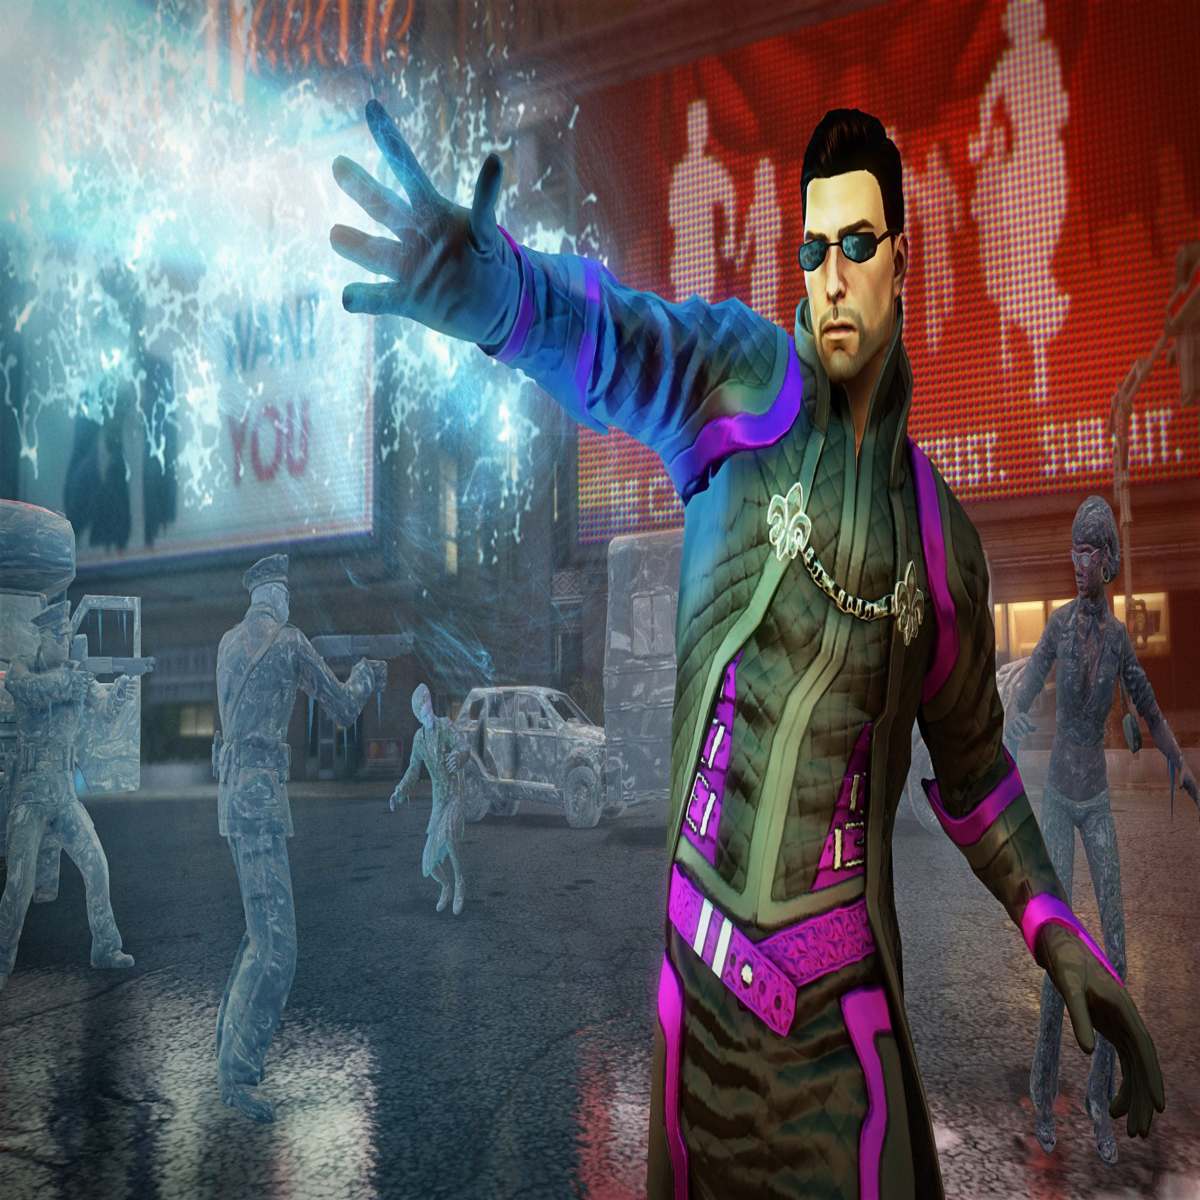 Saints Row 4 – News, Reviews, Videos, and More